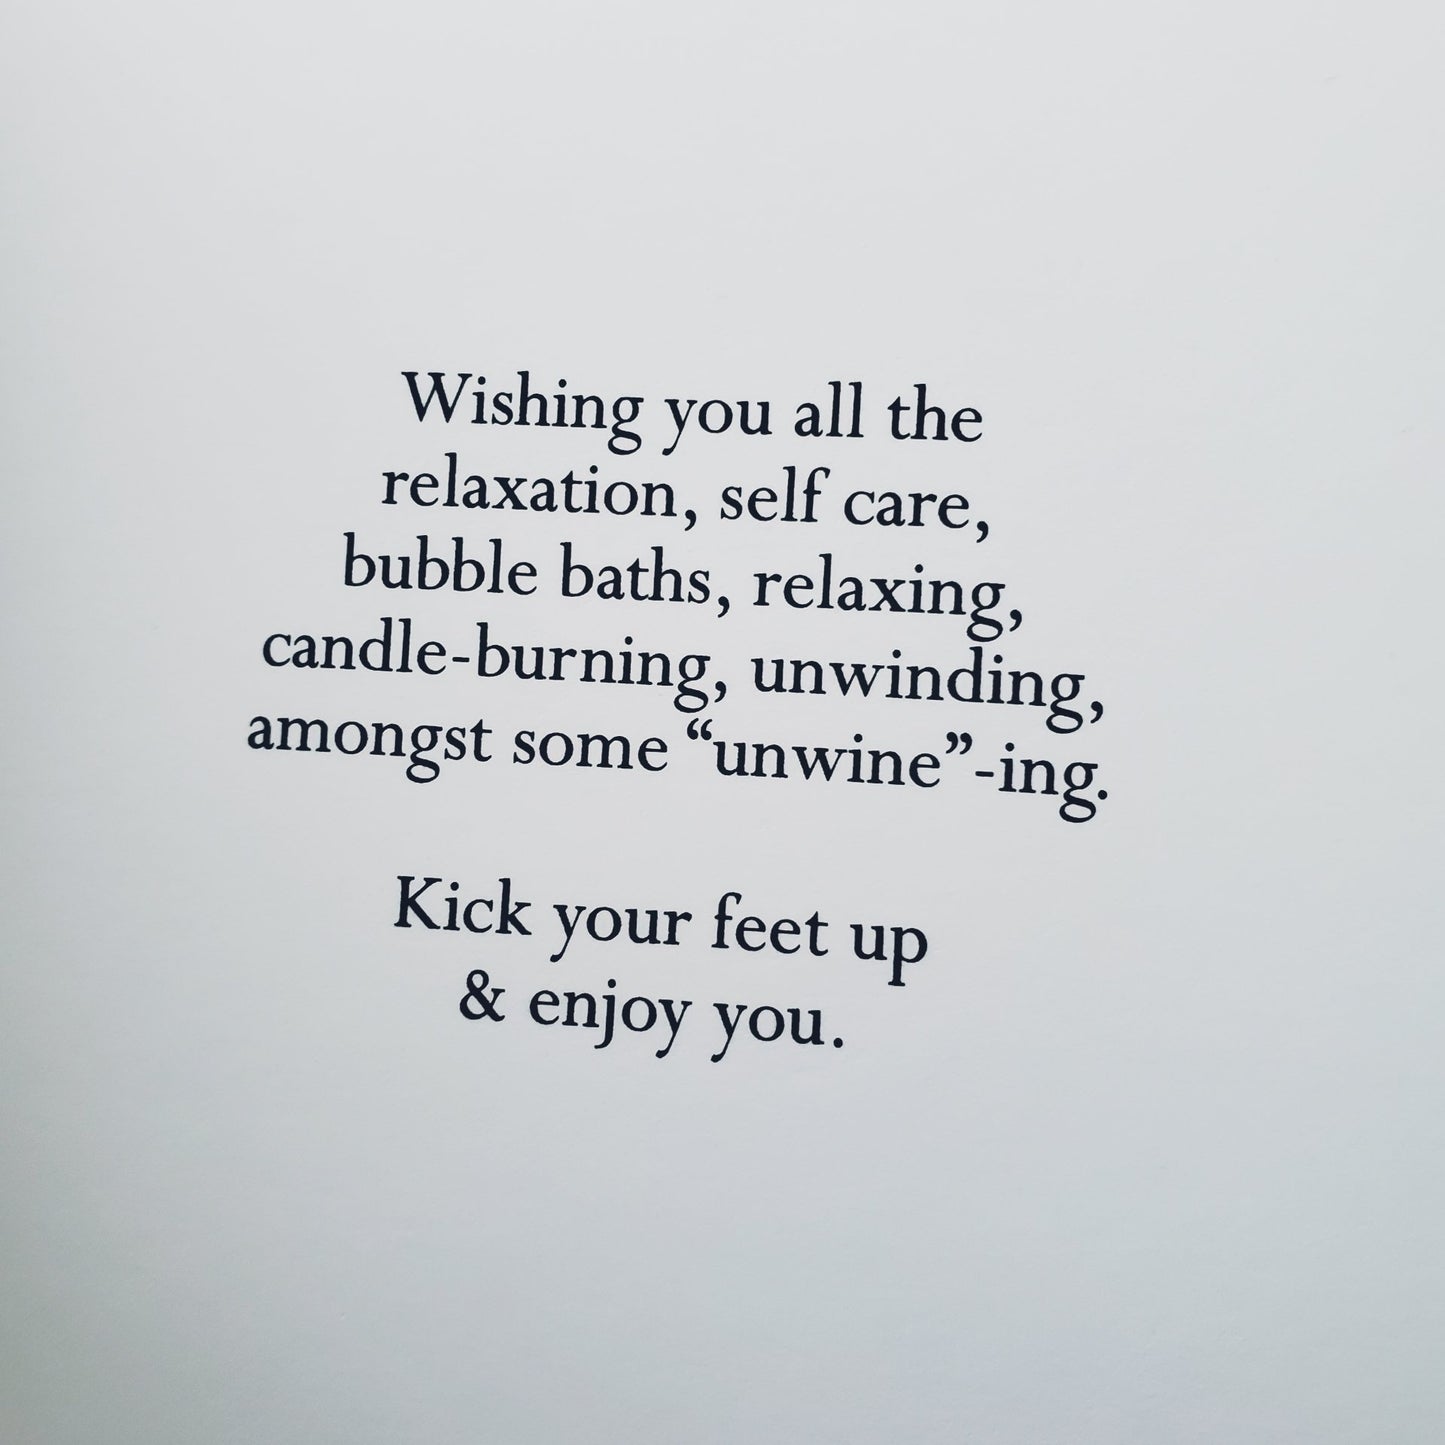 Wishing You All The Selfcare - Greeting Card